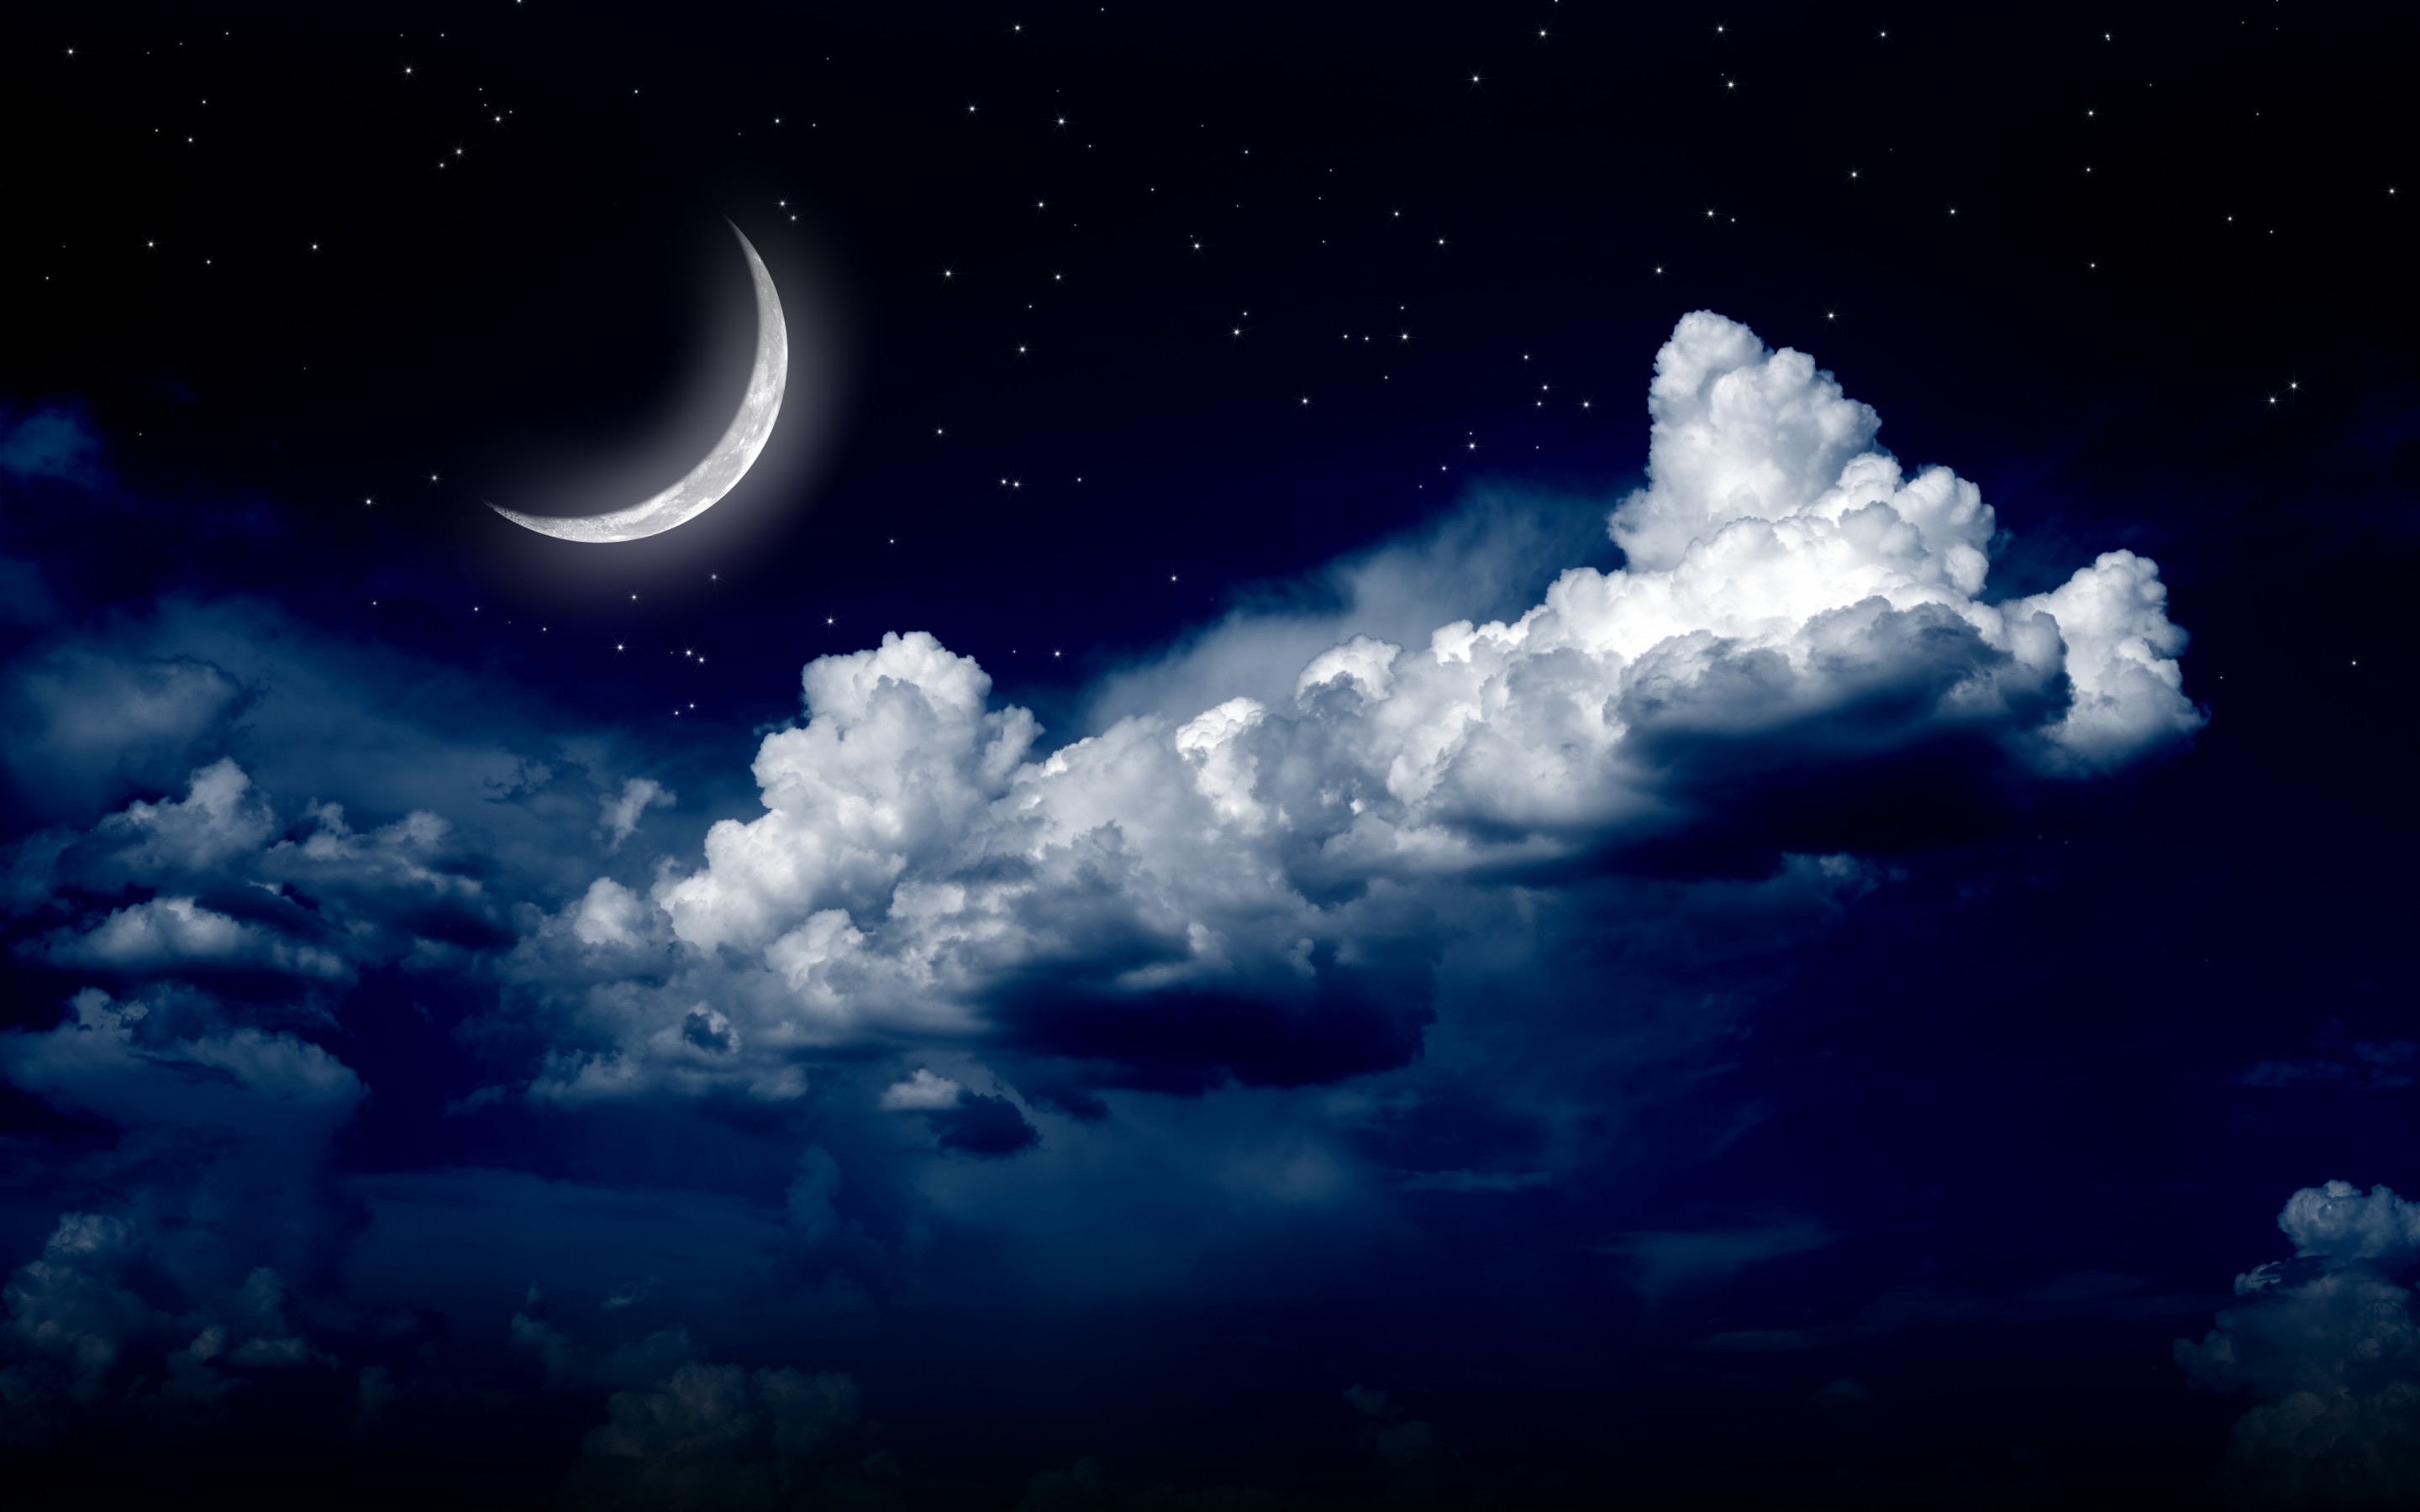  moon night nature landscape clouds stars sky g wallpaper background